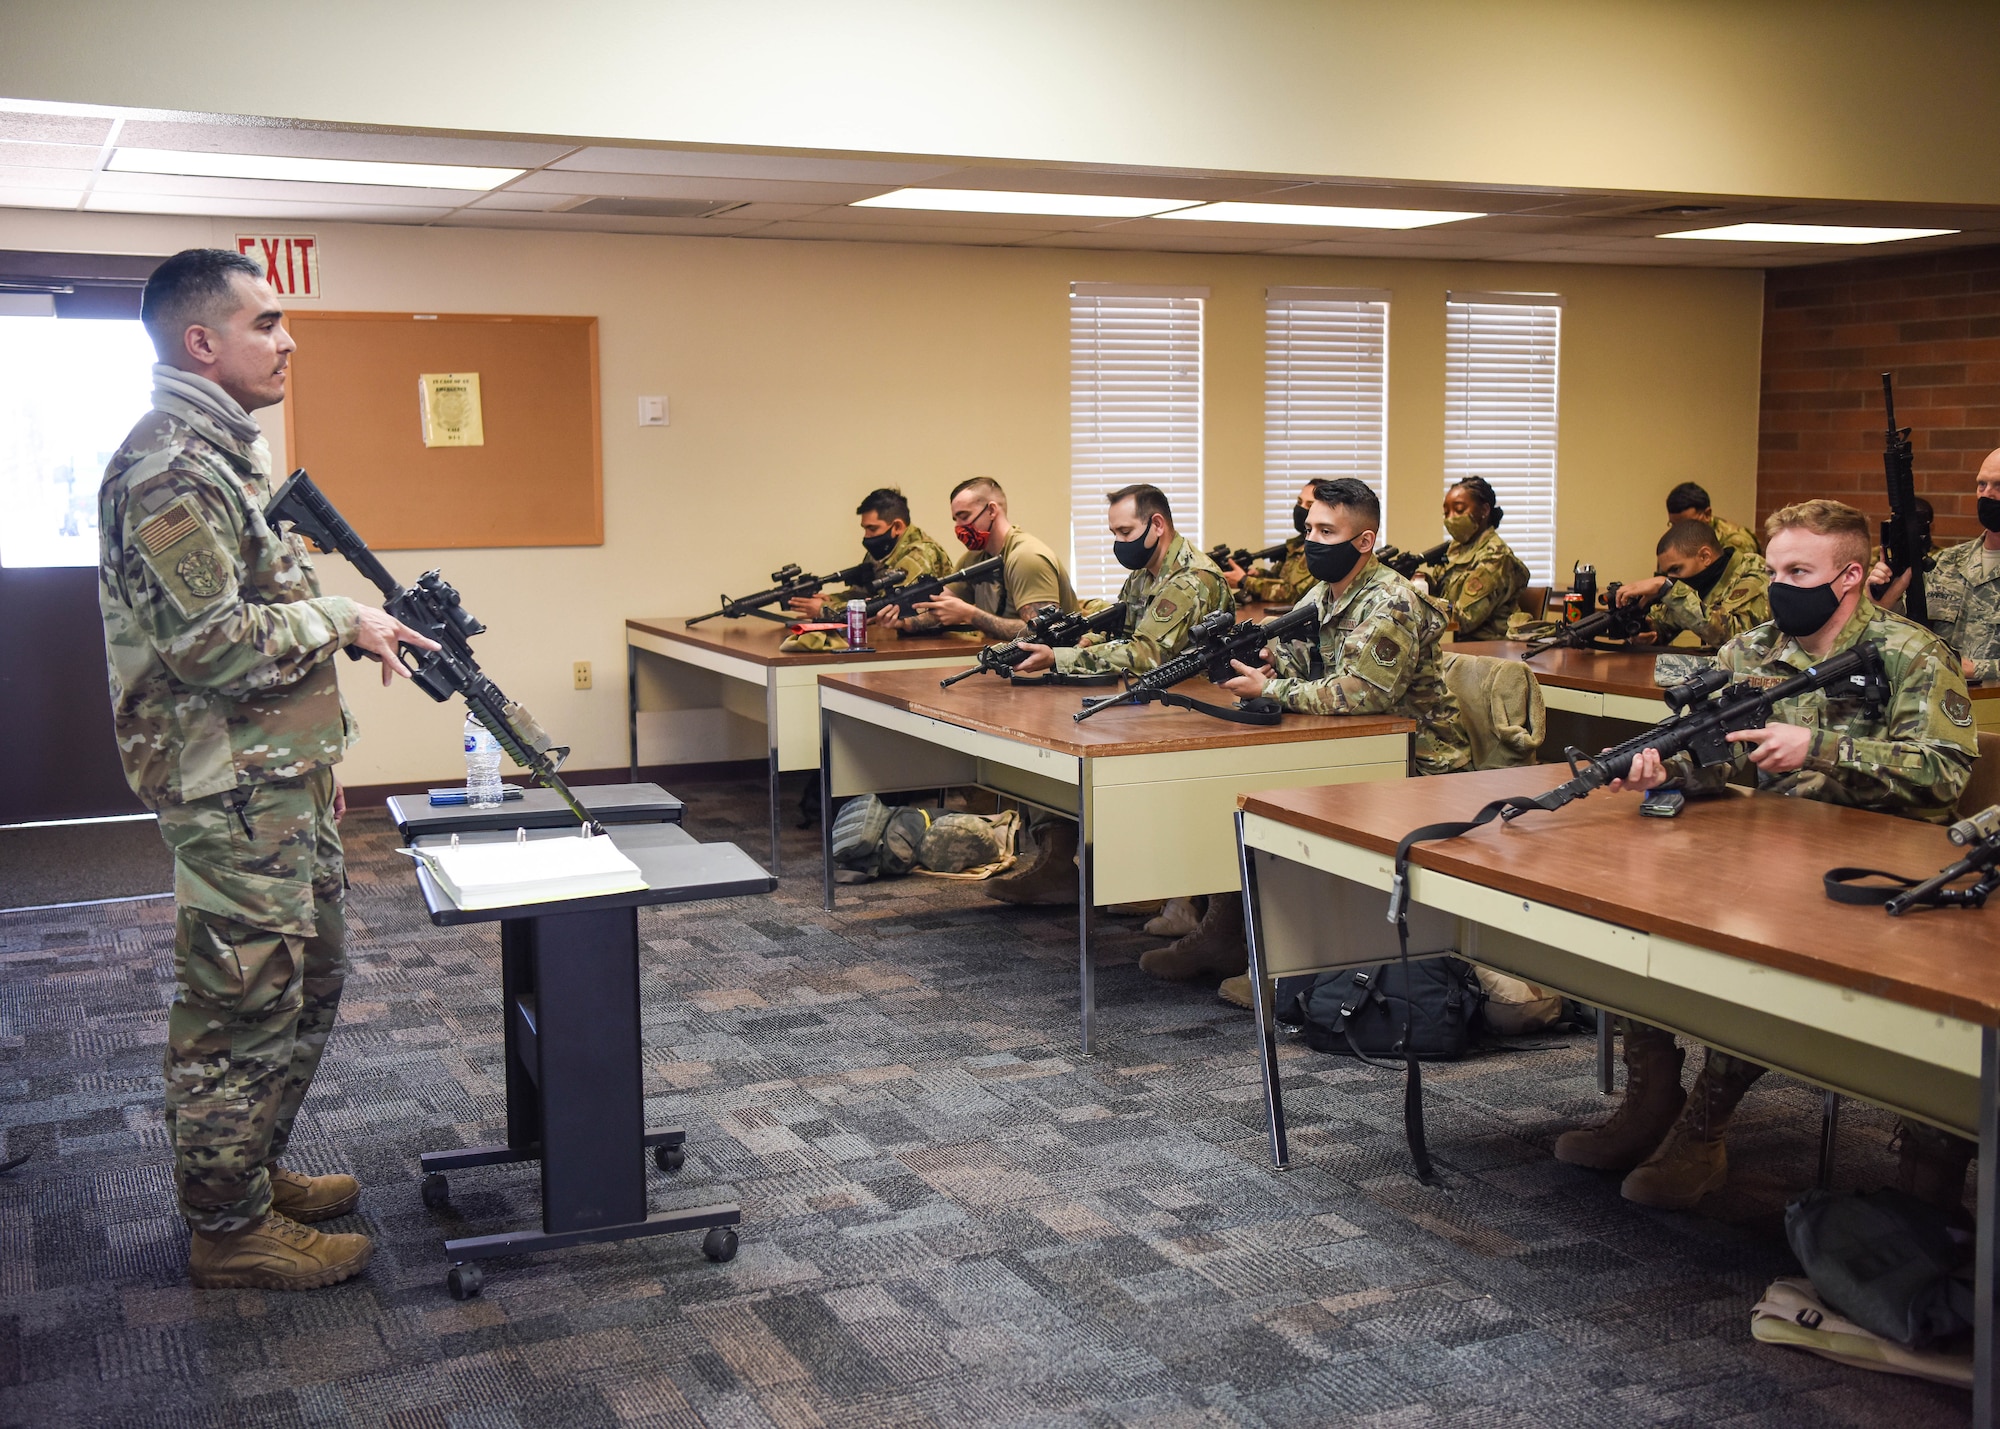 Airmen with the 944th Mission Support Group receive classroom instruction on weapons safety during a deployment training exercise, March 6, 2021 at Camp Navajo, Bellemont, Arizona. The first-of-its-kind exercise was conducted by the 944th MSG, aimed at bringing together four different squadrons with different missions in a simulated deployed environment.